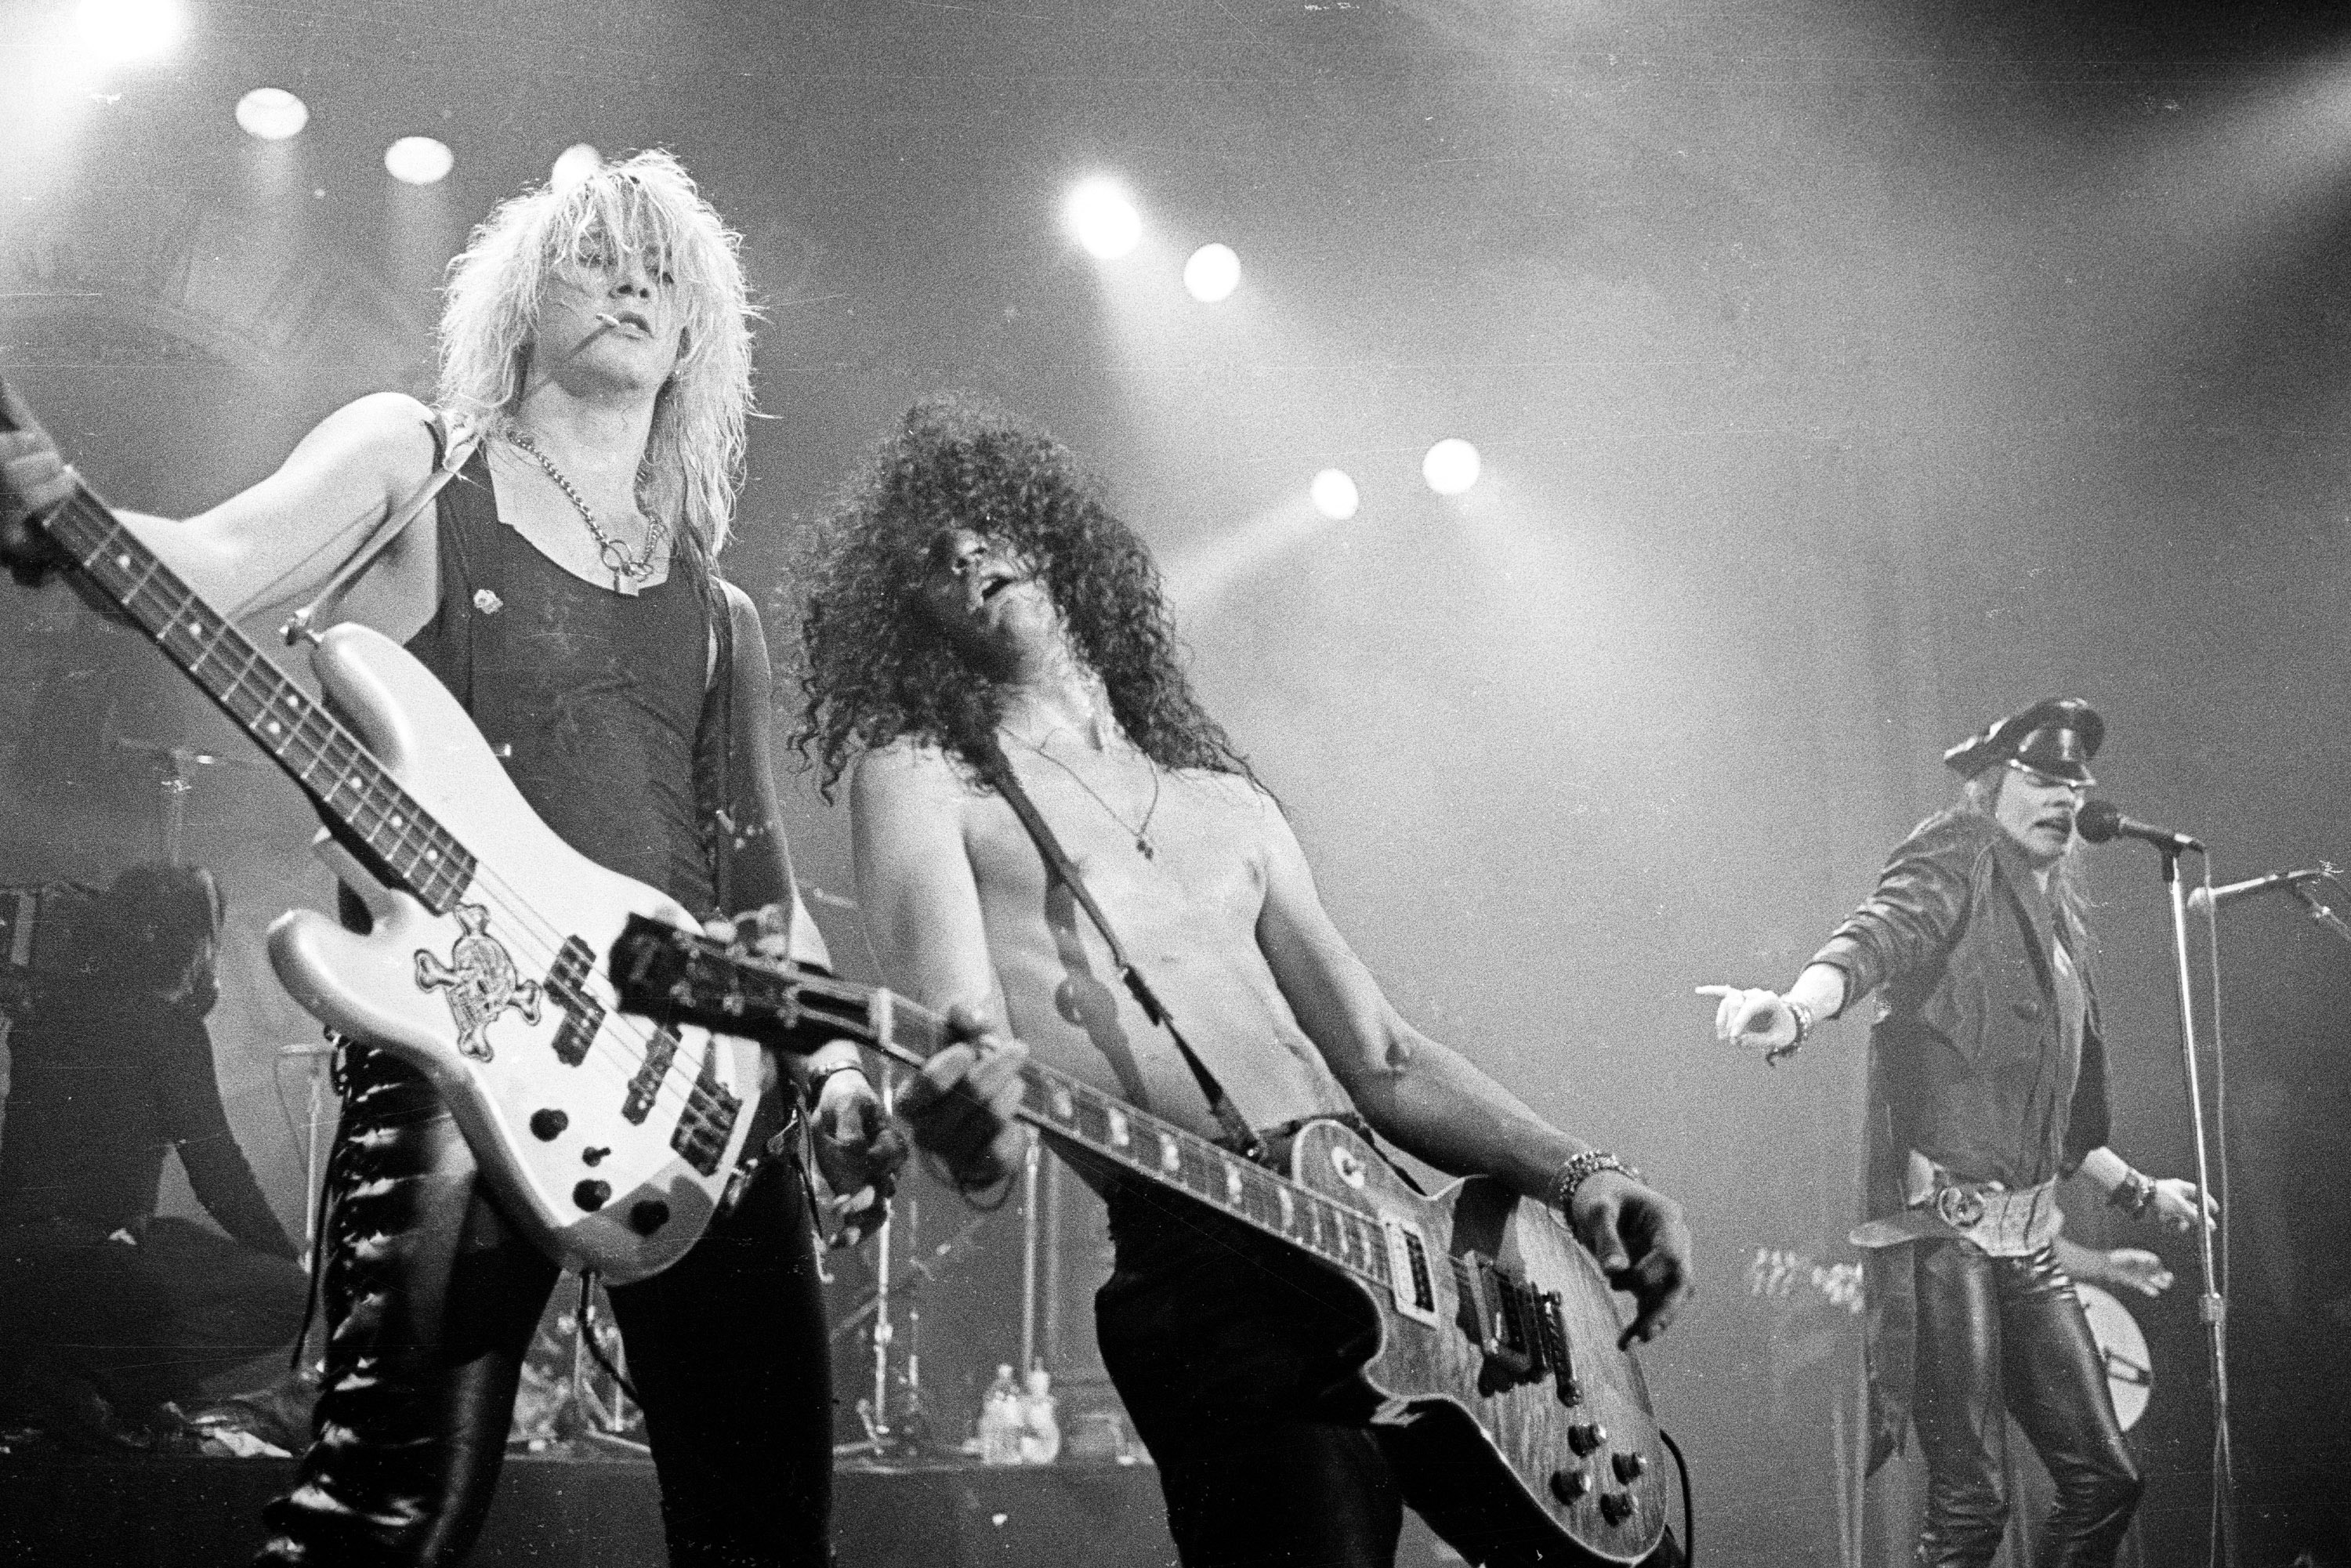 The Most Influential Artists: #11 Guns N' Roses